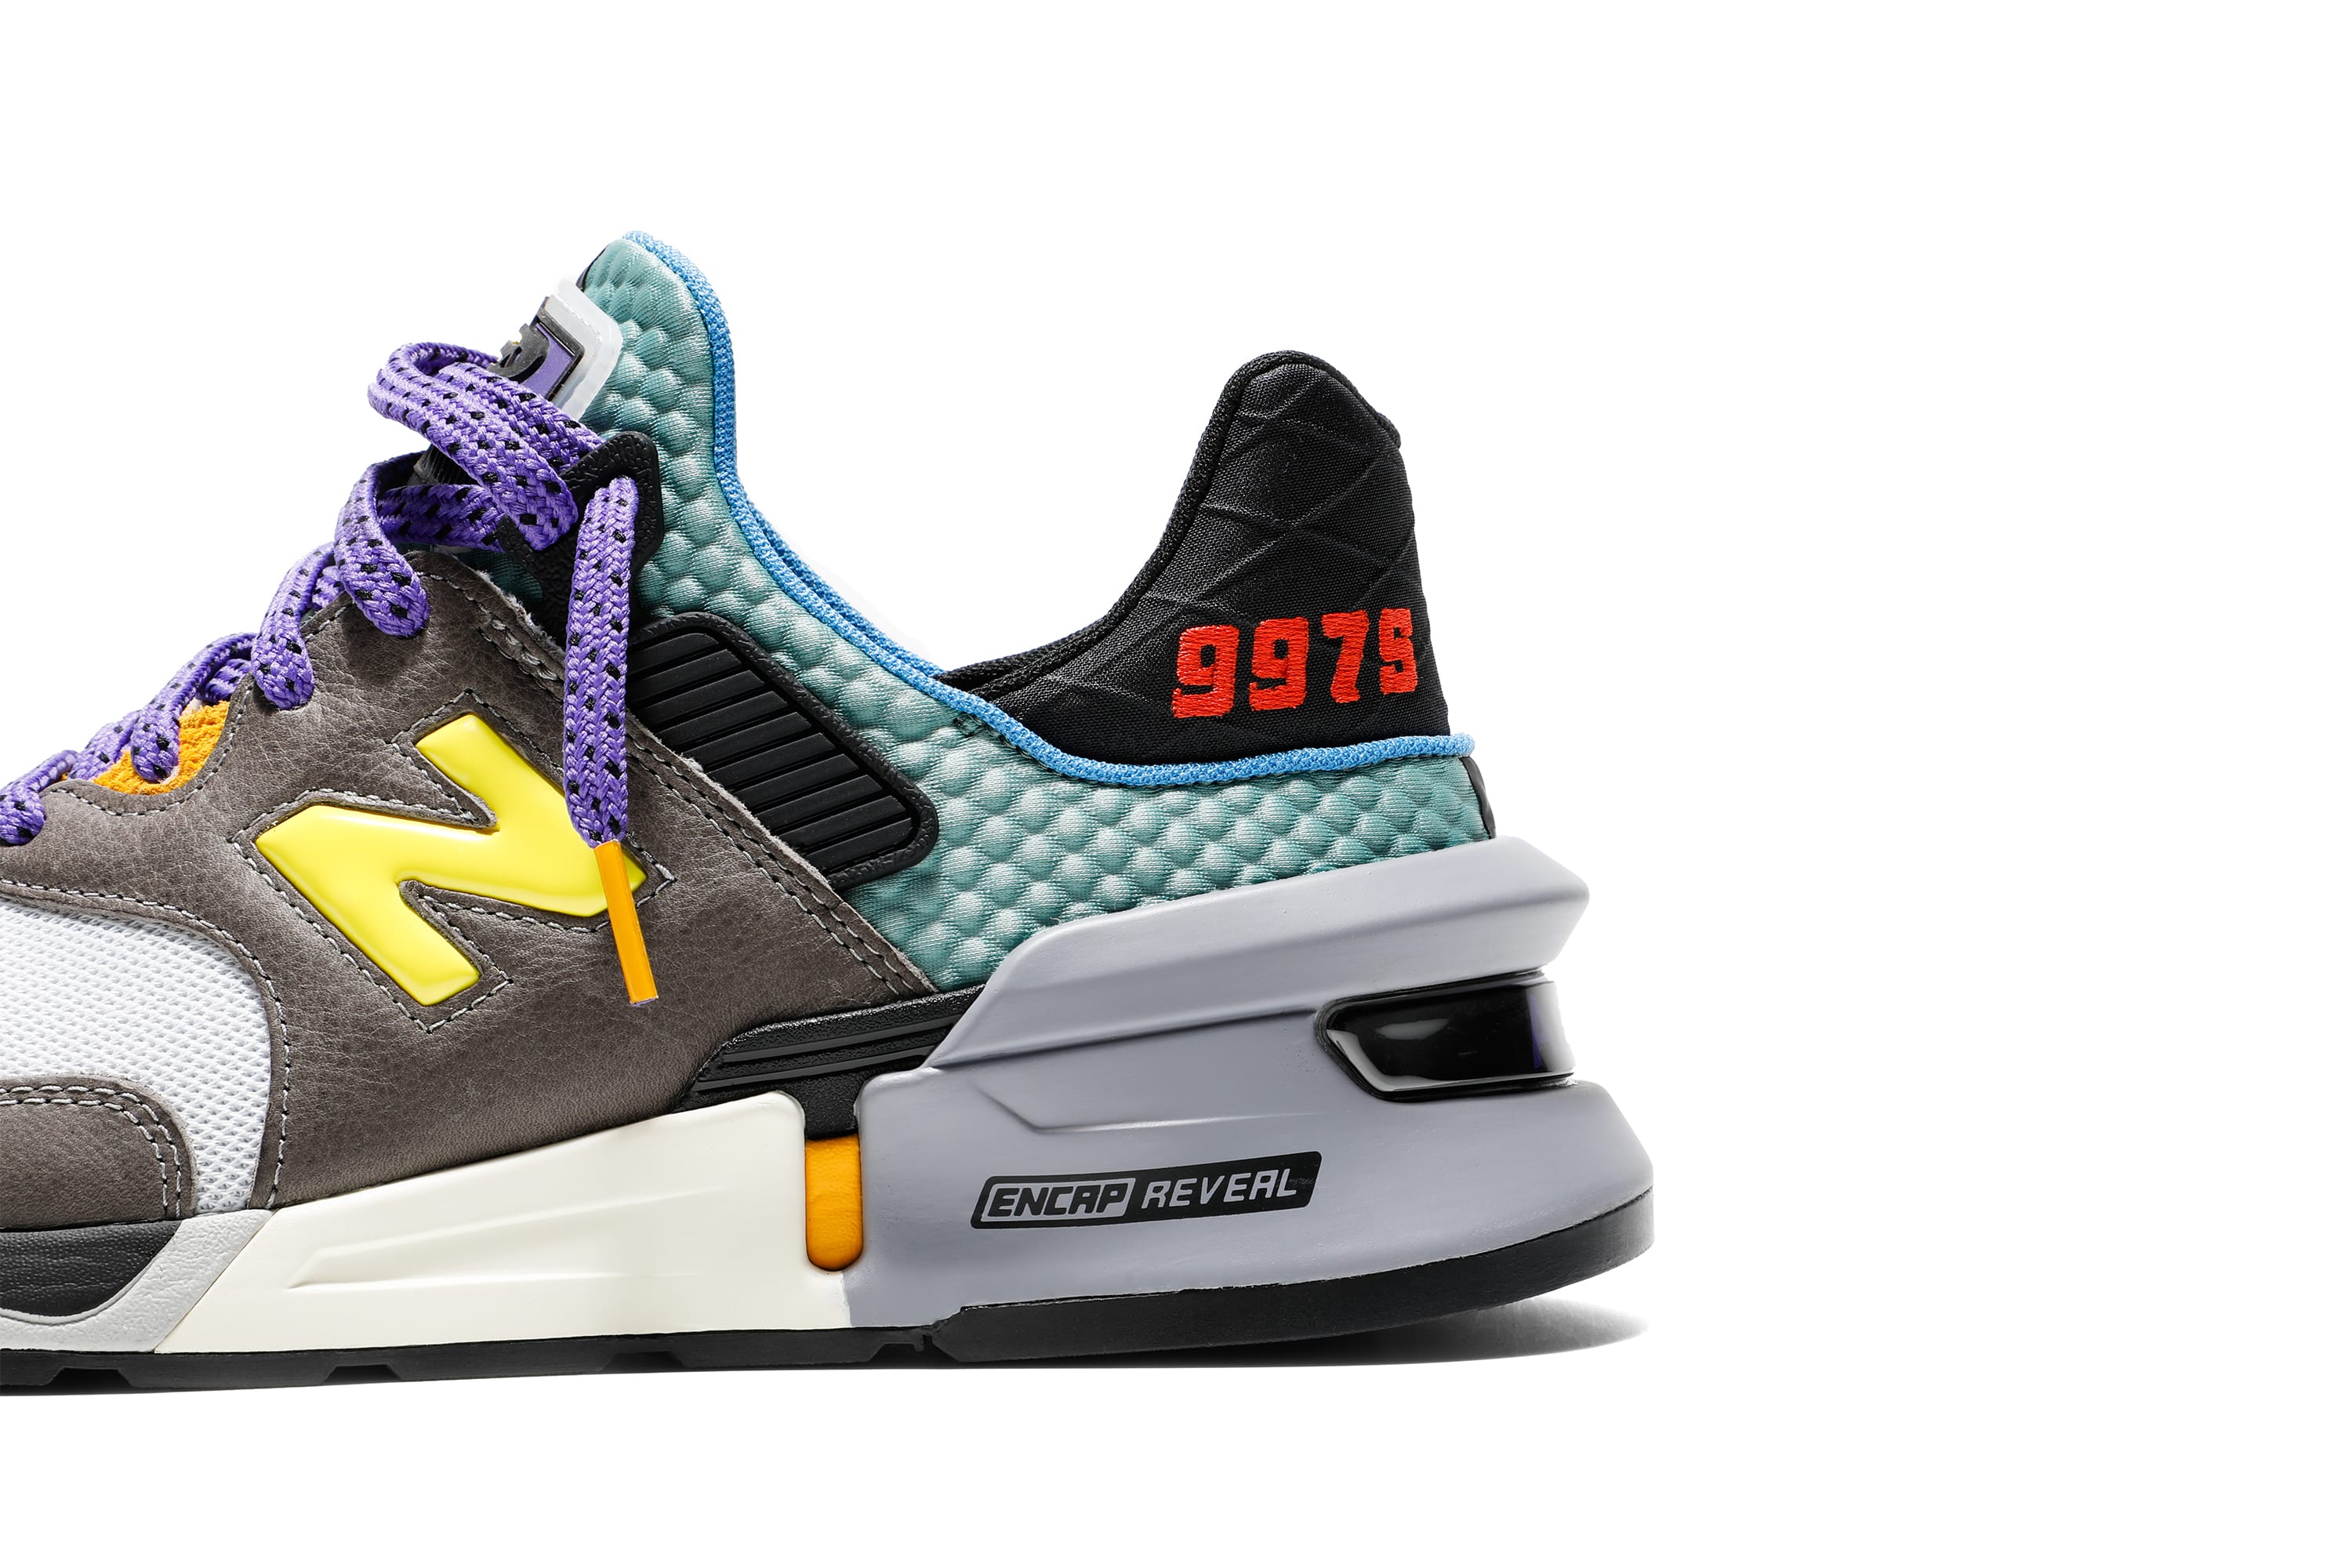 Bodega x New Balance 997S 'No Bad Days' Release Date | Sole Collector